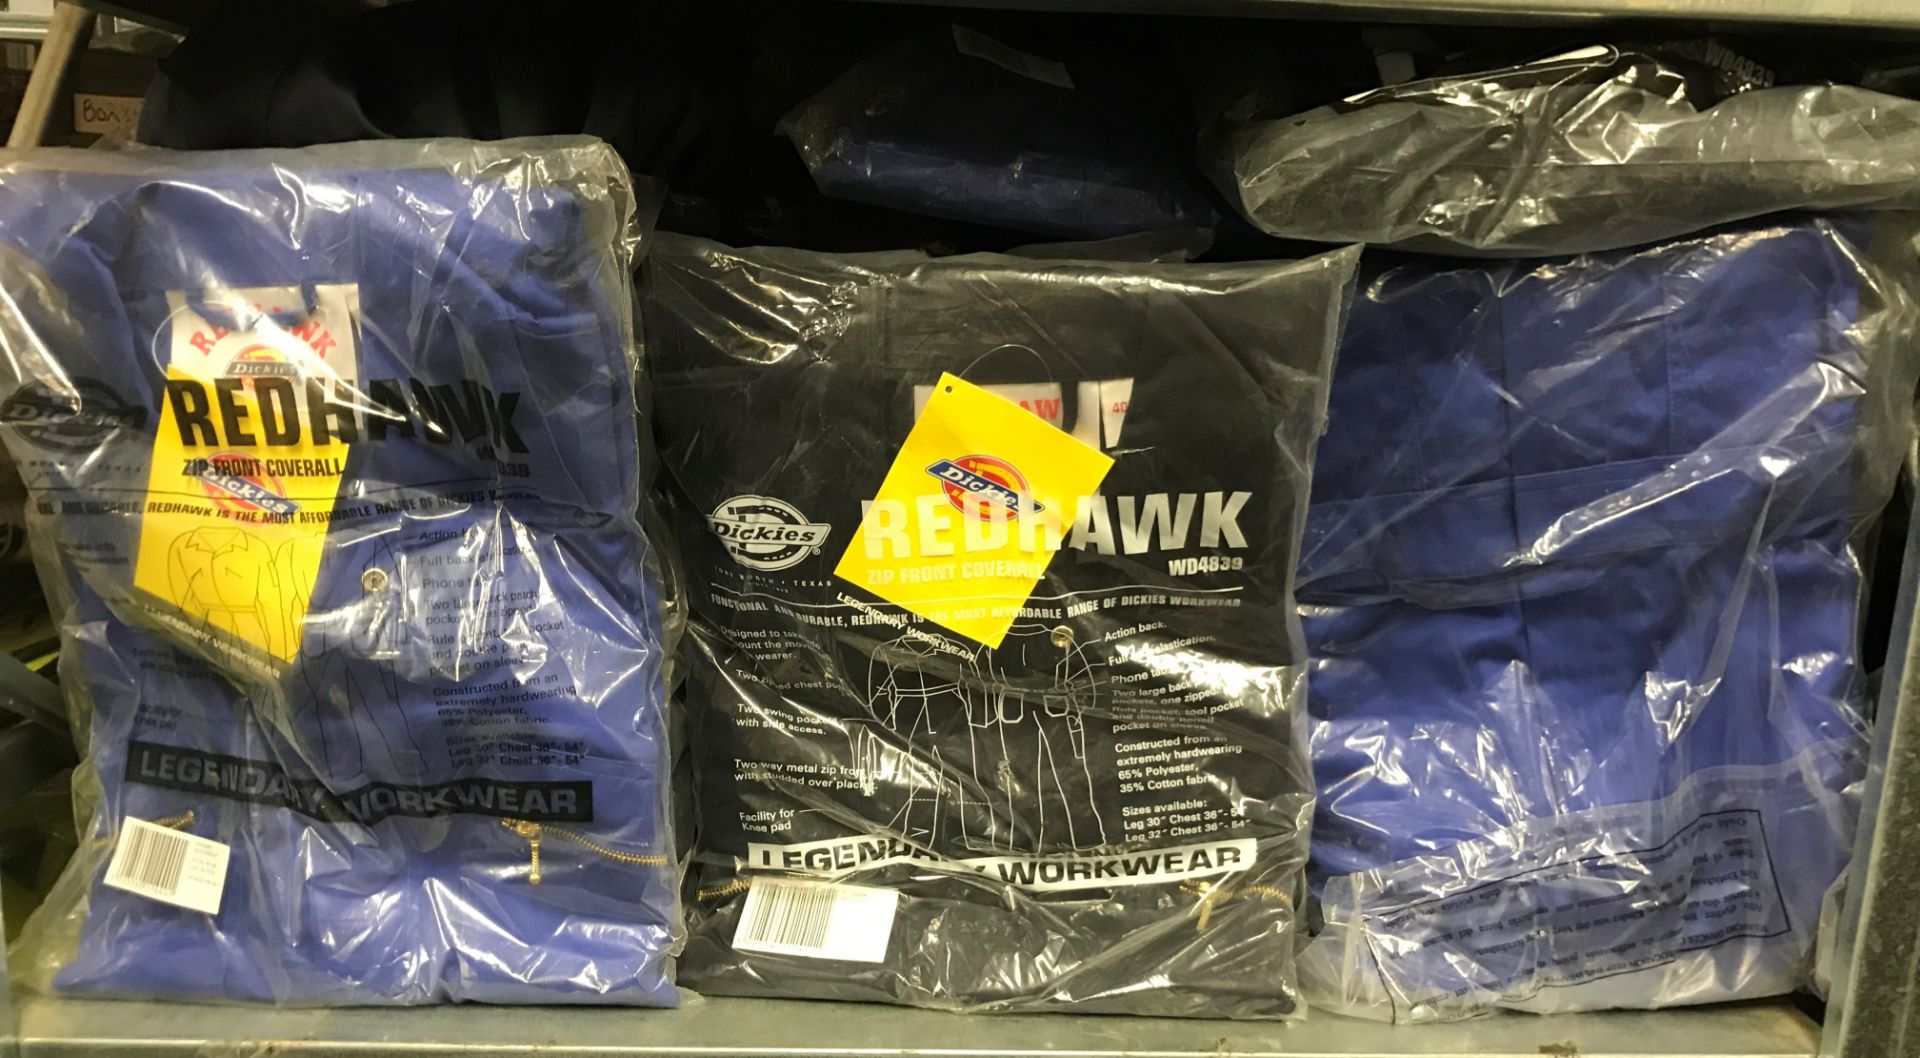 45 x Dickies Redhawk Boiler suits/Coveralls - Navy & Royal Blue - Various Sizes - Image 2 of 2